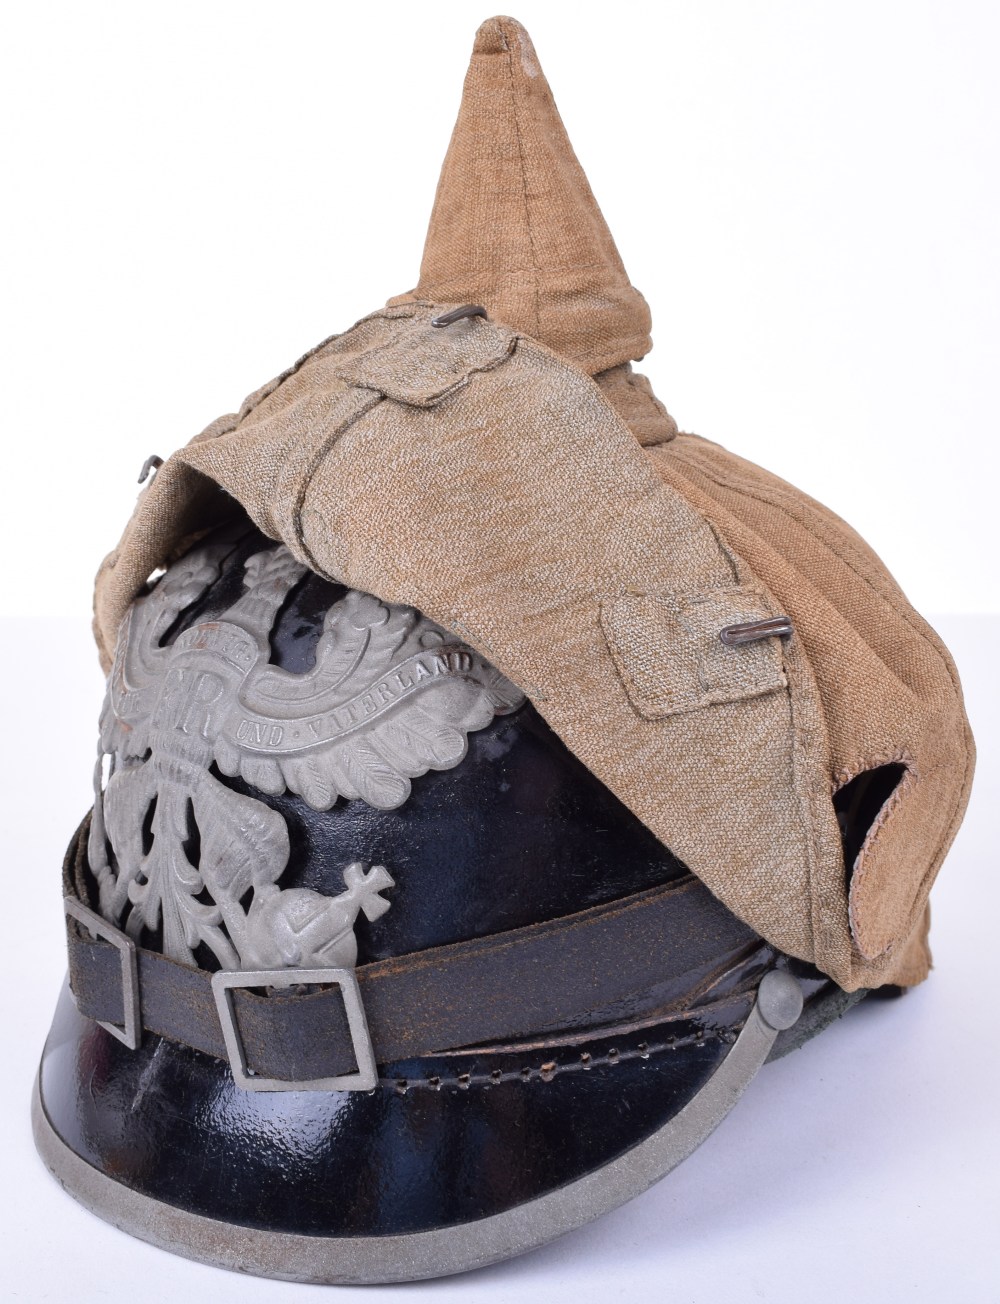 Prussian Other Ranks Pickelhaube with Original Trench Cover - Image 5 of 19